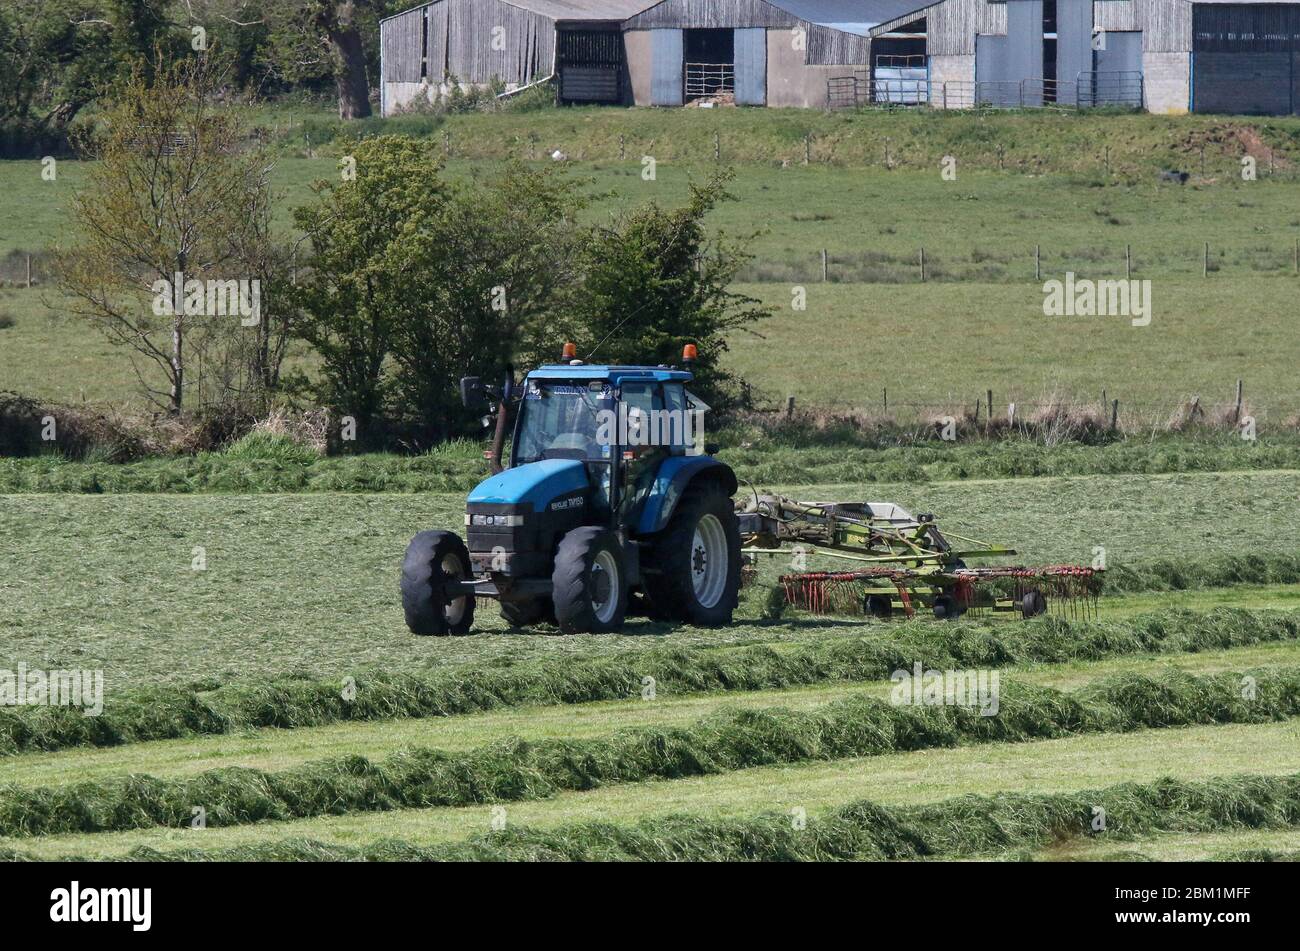 Magheralin, County Armagh, Northern Ireland. 06 May 2020. UK weather - bright blue sky and sunshine today as the execptional spell of dry spring weather continues. There will be some rain overnight before dry and cooler weather returns over the weekend. A tractor gathers up grass on a field. Credit: CAZIMB/Alamy Live News. Stock Photo